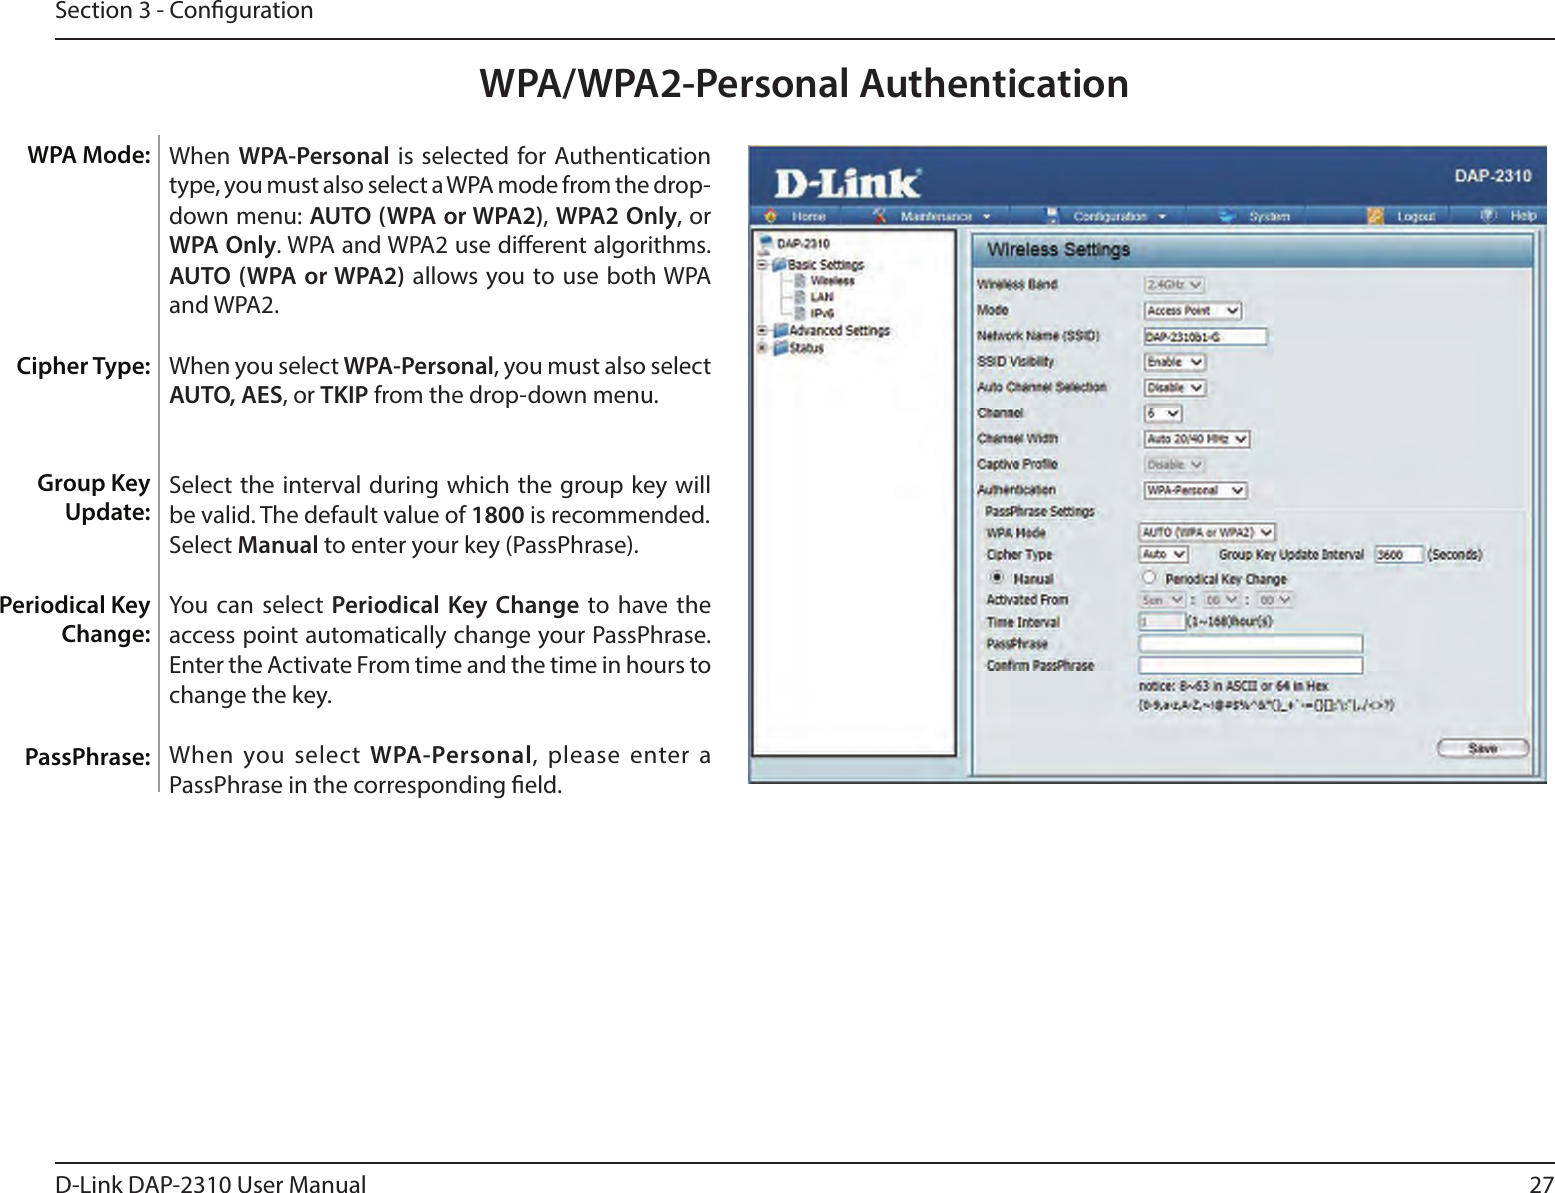 27D-Link DAP-2310 User ManualSection 3 - CongurationWPA/WPA2-Personal AuthenticationWhen WPA-Personal is selected for Authentication type, you must also select a WPA mode from the drop-down menu: AUTO (WPA or WPA2), WPA2 Only, or WPA Only. WPA and WPA2 use dierent algorithms. AUTO (WPA or WPA2) allows you to use both WPA and WPA2.When you select WPA-Personal, you must also select AUTO, AES, or TKIP from the drop-down menu.Select the interval during which the group key will be valid. The default value of 1800 is recommended.Select Manual to enter your key (PassPhrase). You can select Periodical Key Change to  have  the access point automatically change your PassPhrase. Enter the Activate From time and the time in hours to change the key.When you select WPA-Personal,  please enter a PassPhrase in the corresponding eld.WPA Mode: Cipher Type:Group Key Update:Periodical Key Change:PassPhrase: